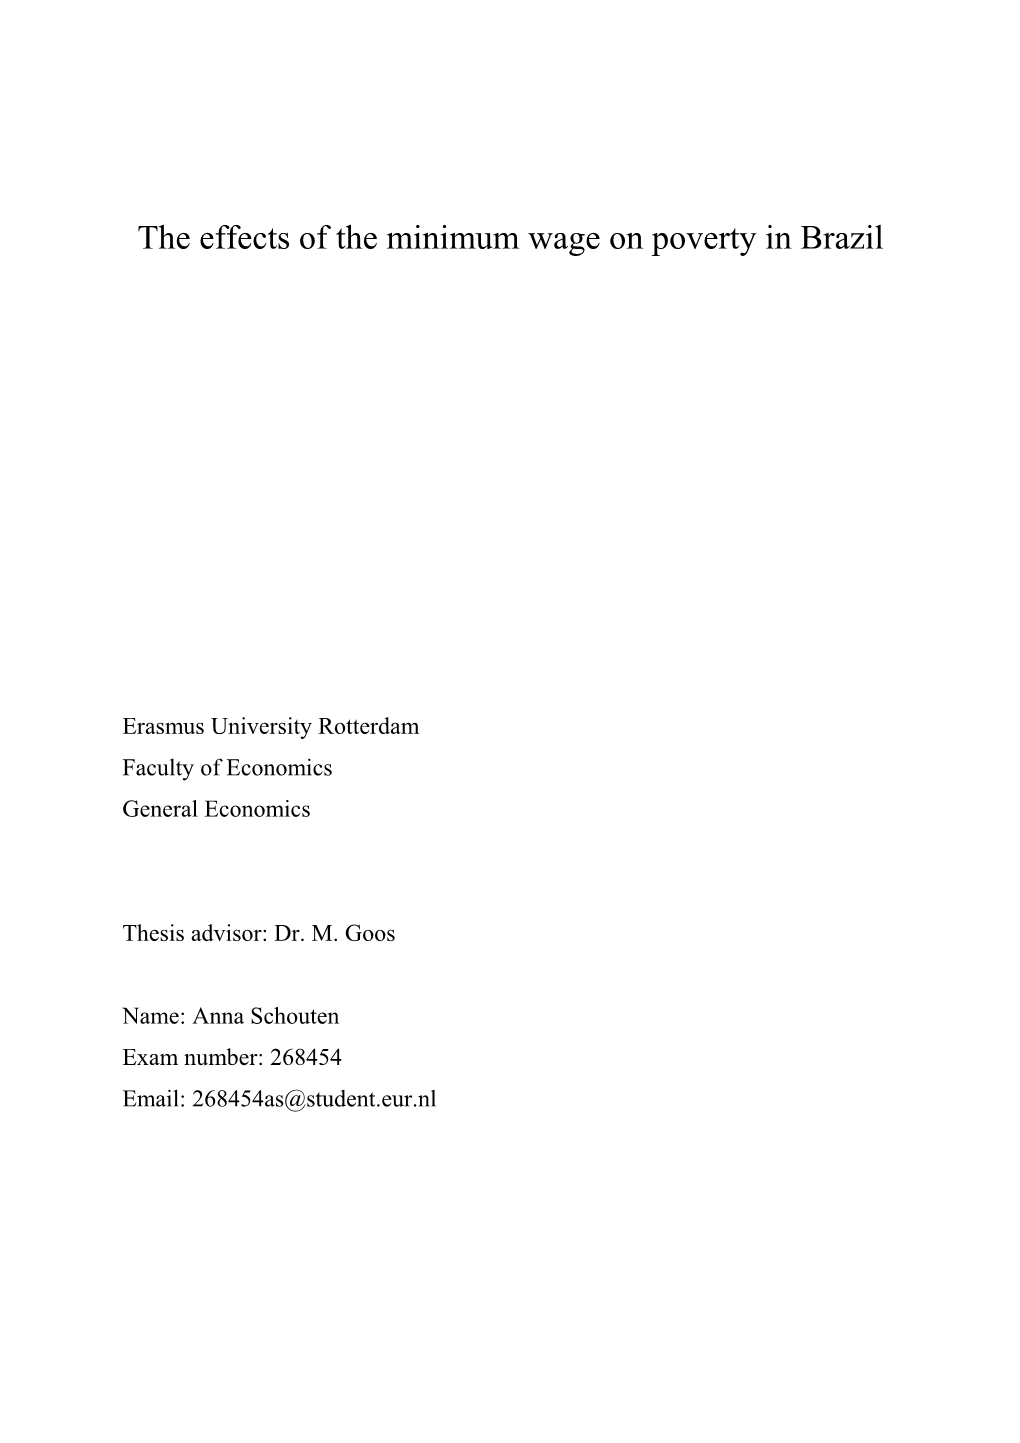 The Effects of the Minimum Wage on Poverty in Brazil